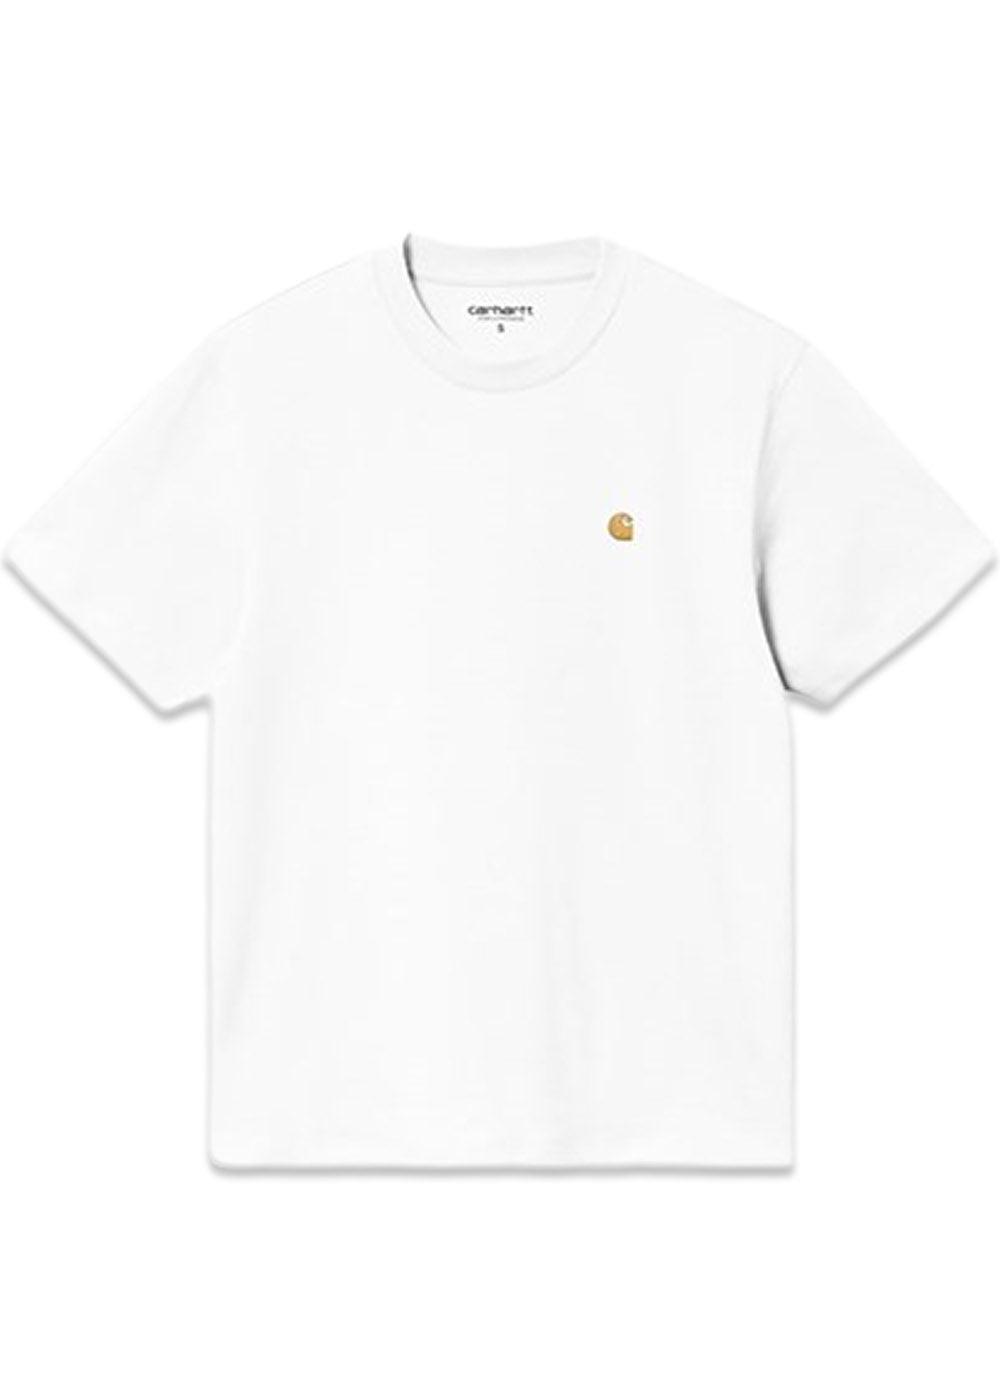 W S/S Chase T-Shirt - White / Gold